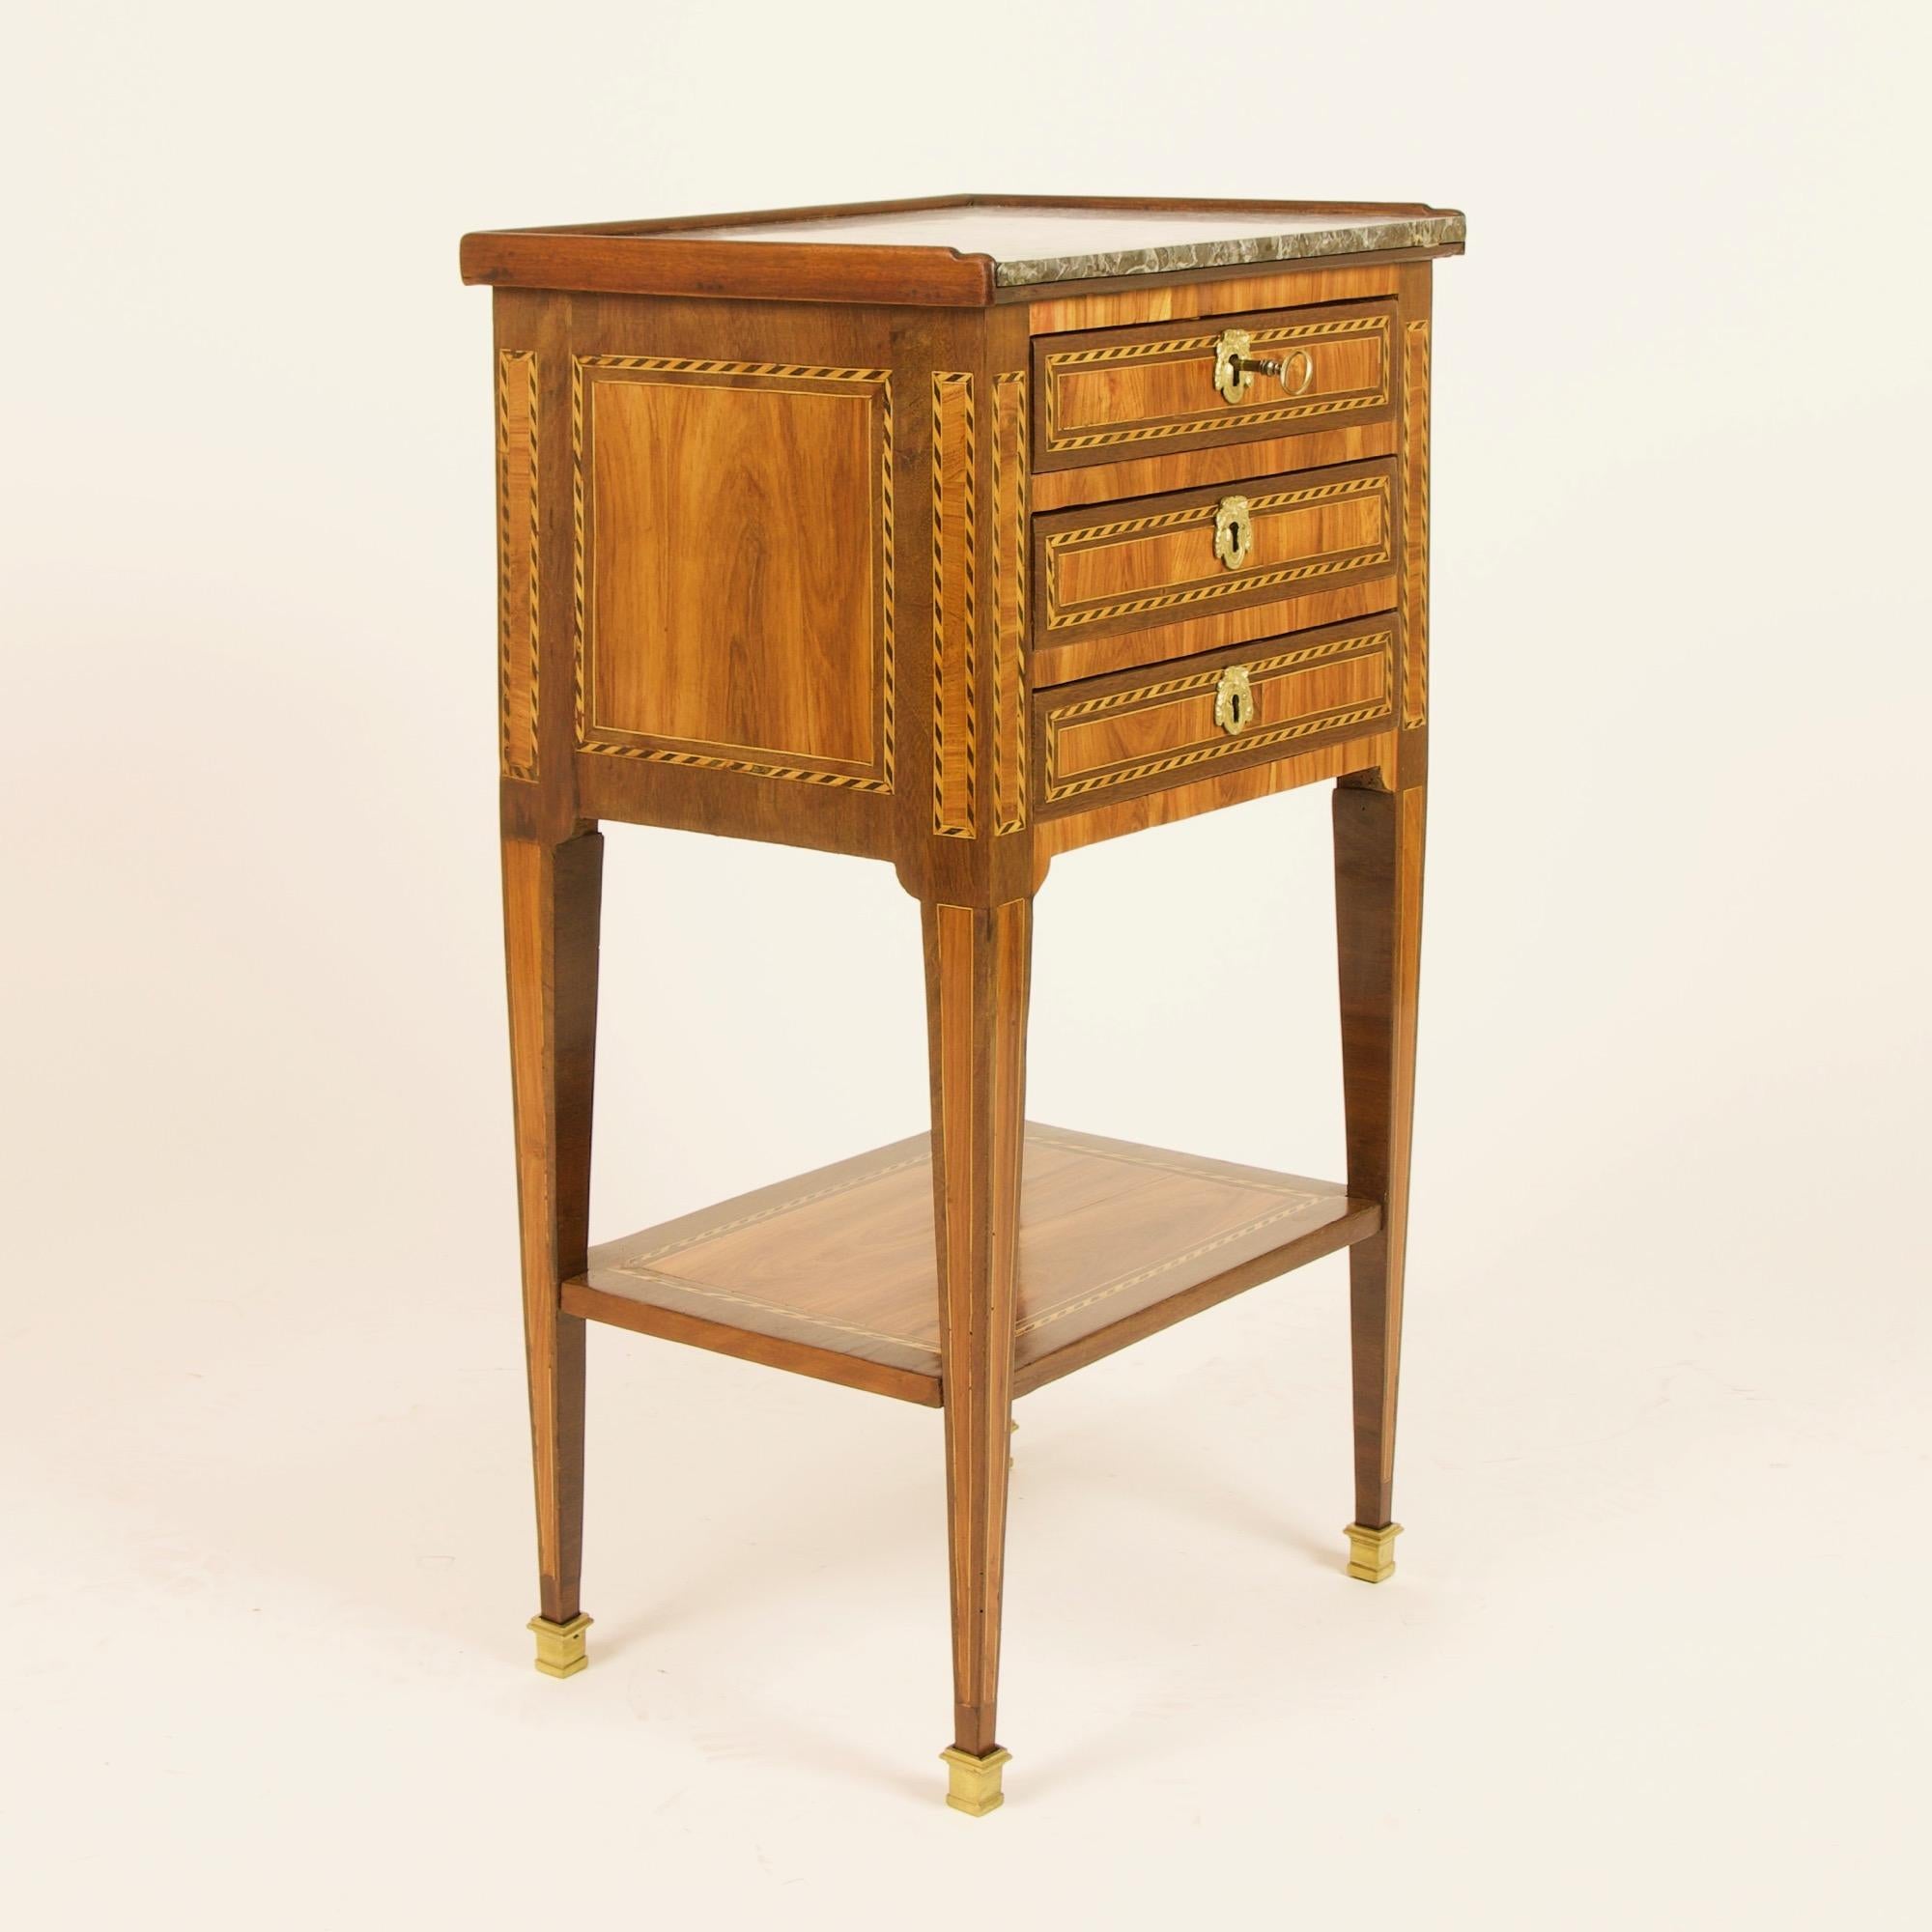 Gilt French 18th Century Small Marquetry Louis XVI Side Table or Writing Table